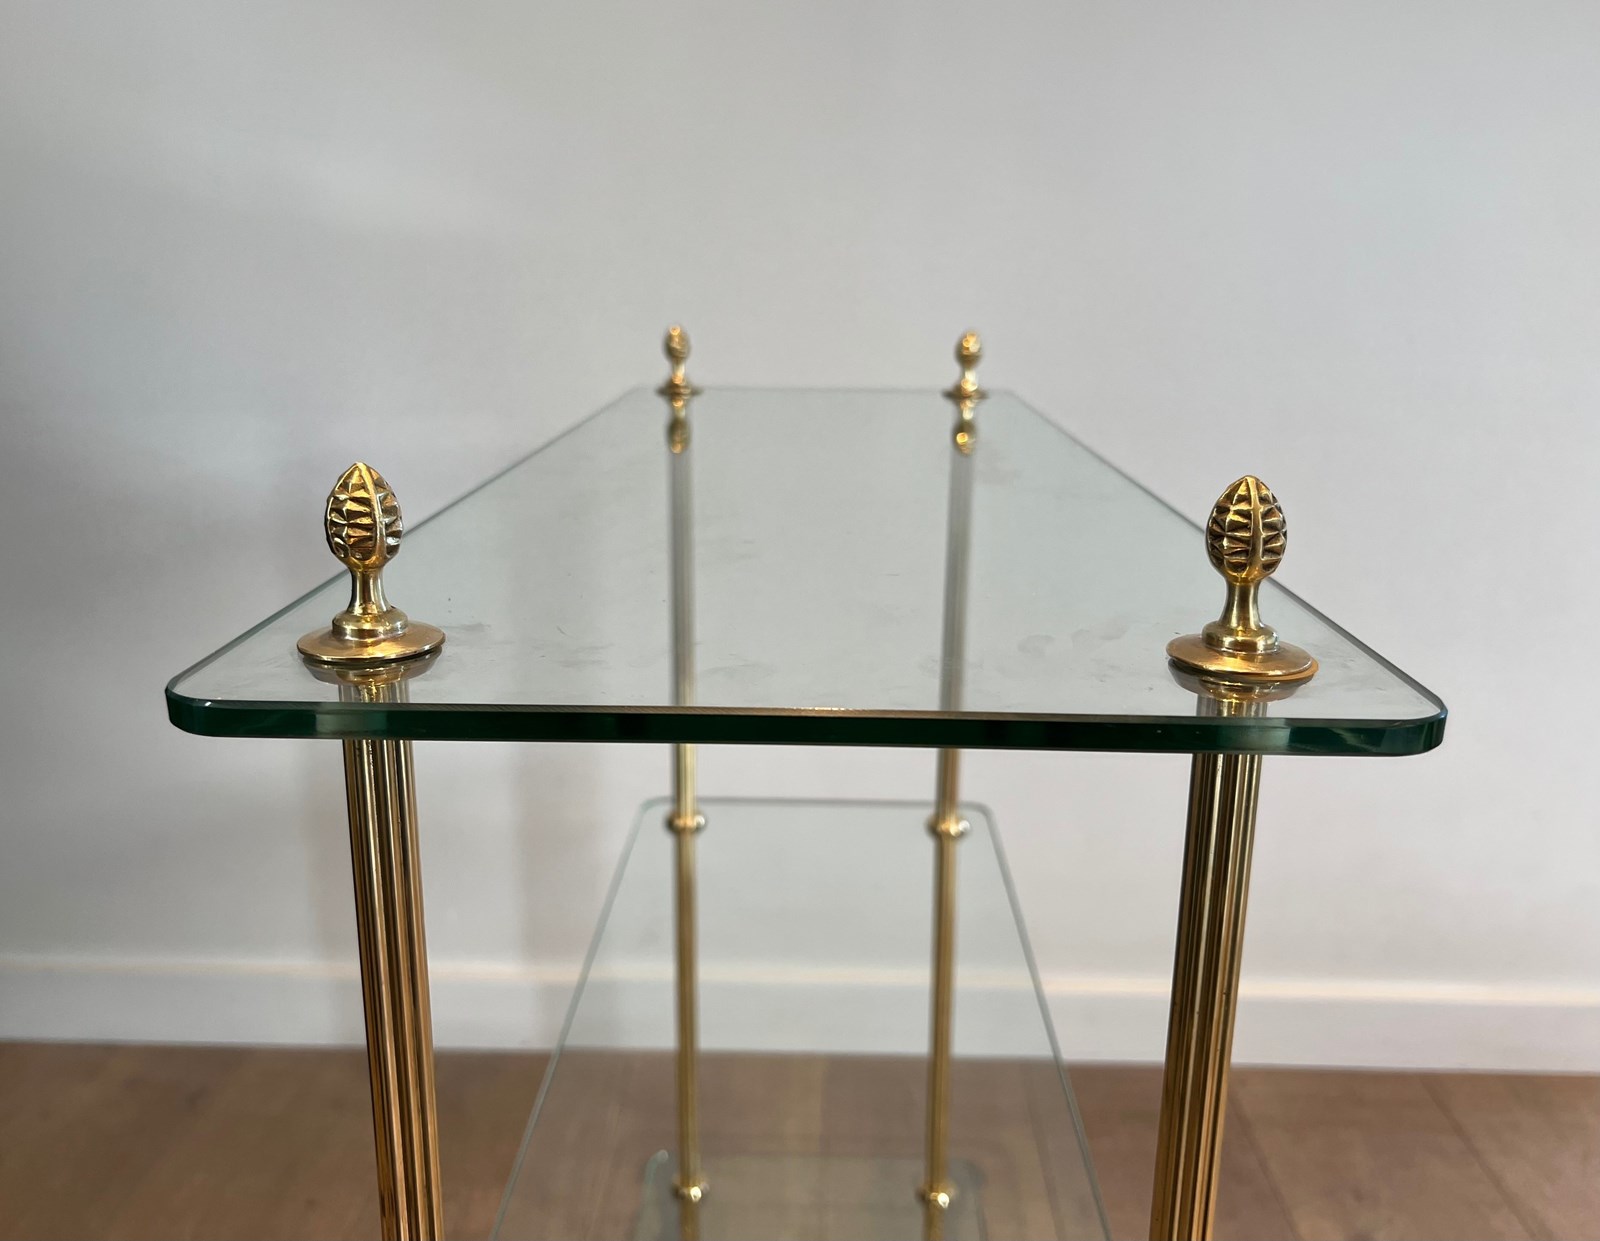 20th Century, French, Vintage Brass and Glass Shelf on Base, 1960s